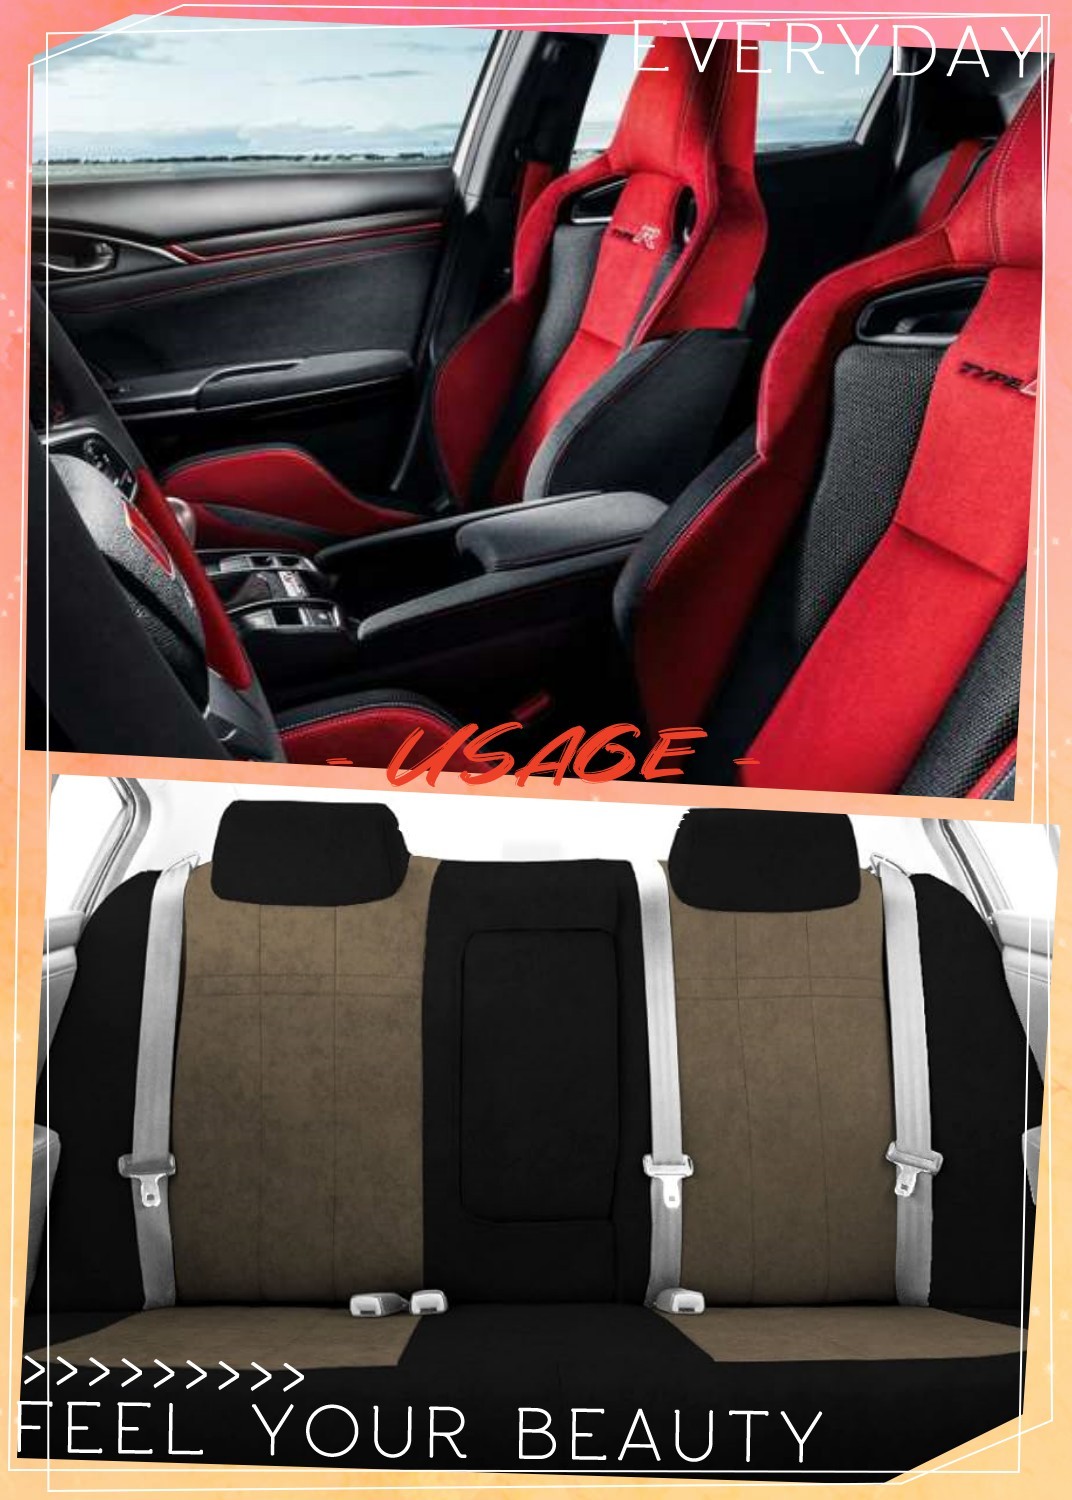  Suede Material Vinyl Leather For Car Interiors